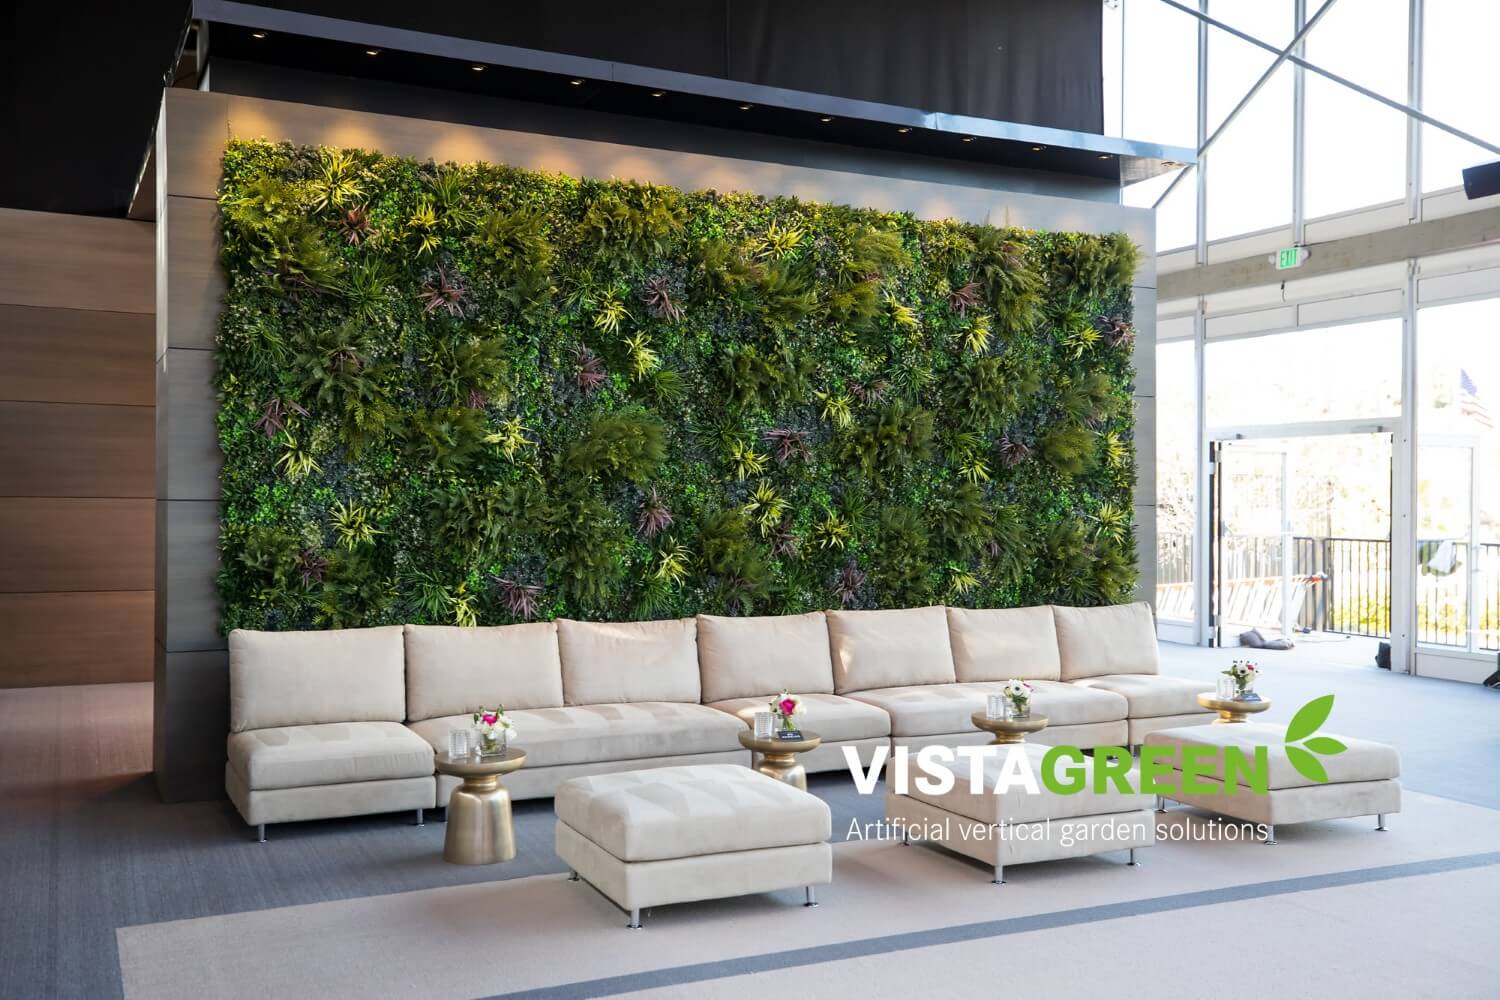 Commercial artificial living wall panel from SYNLawn